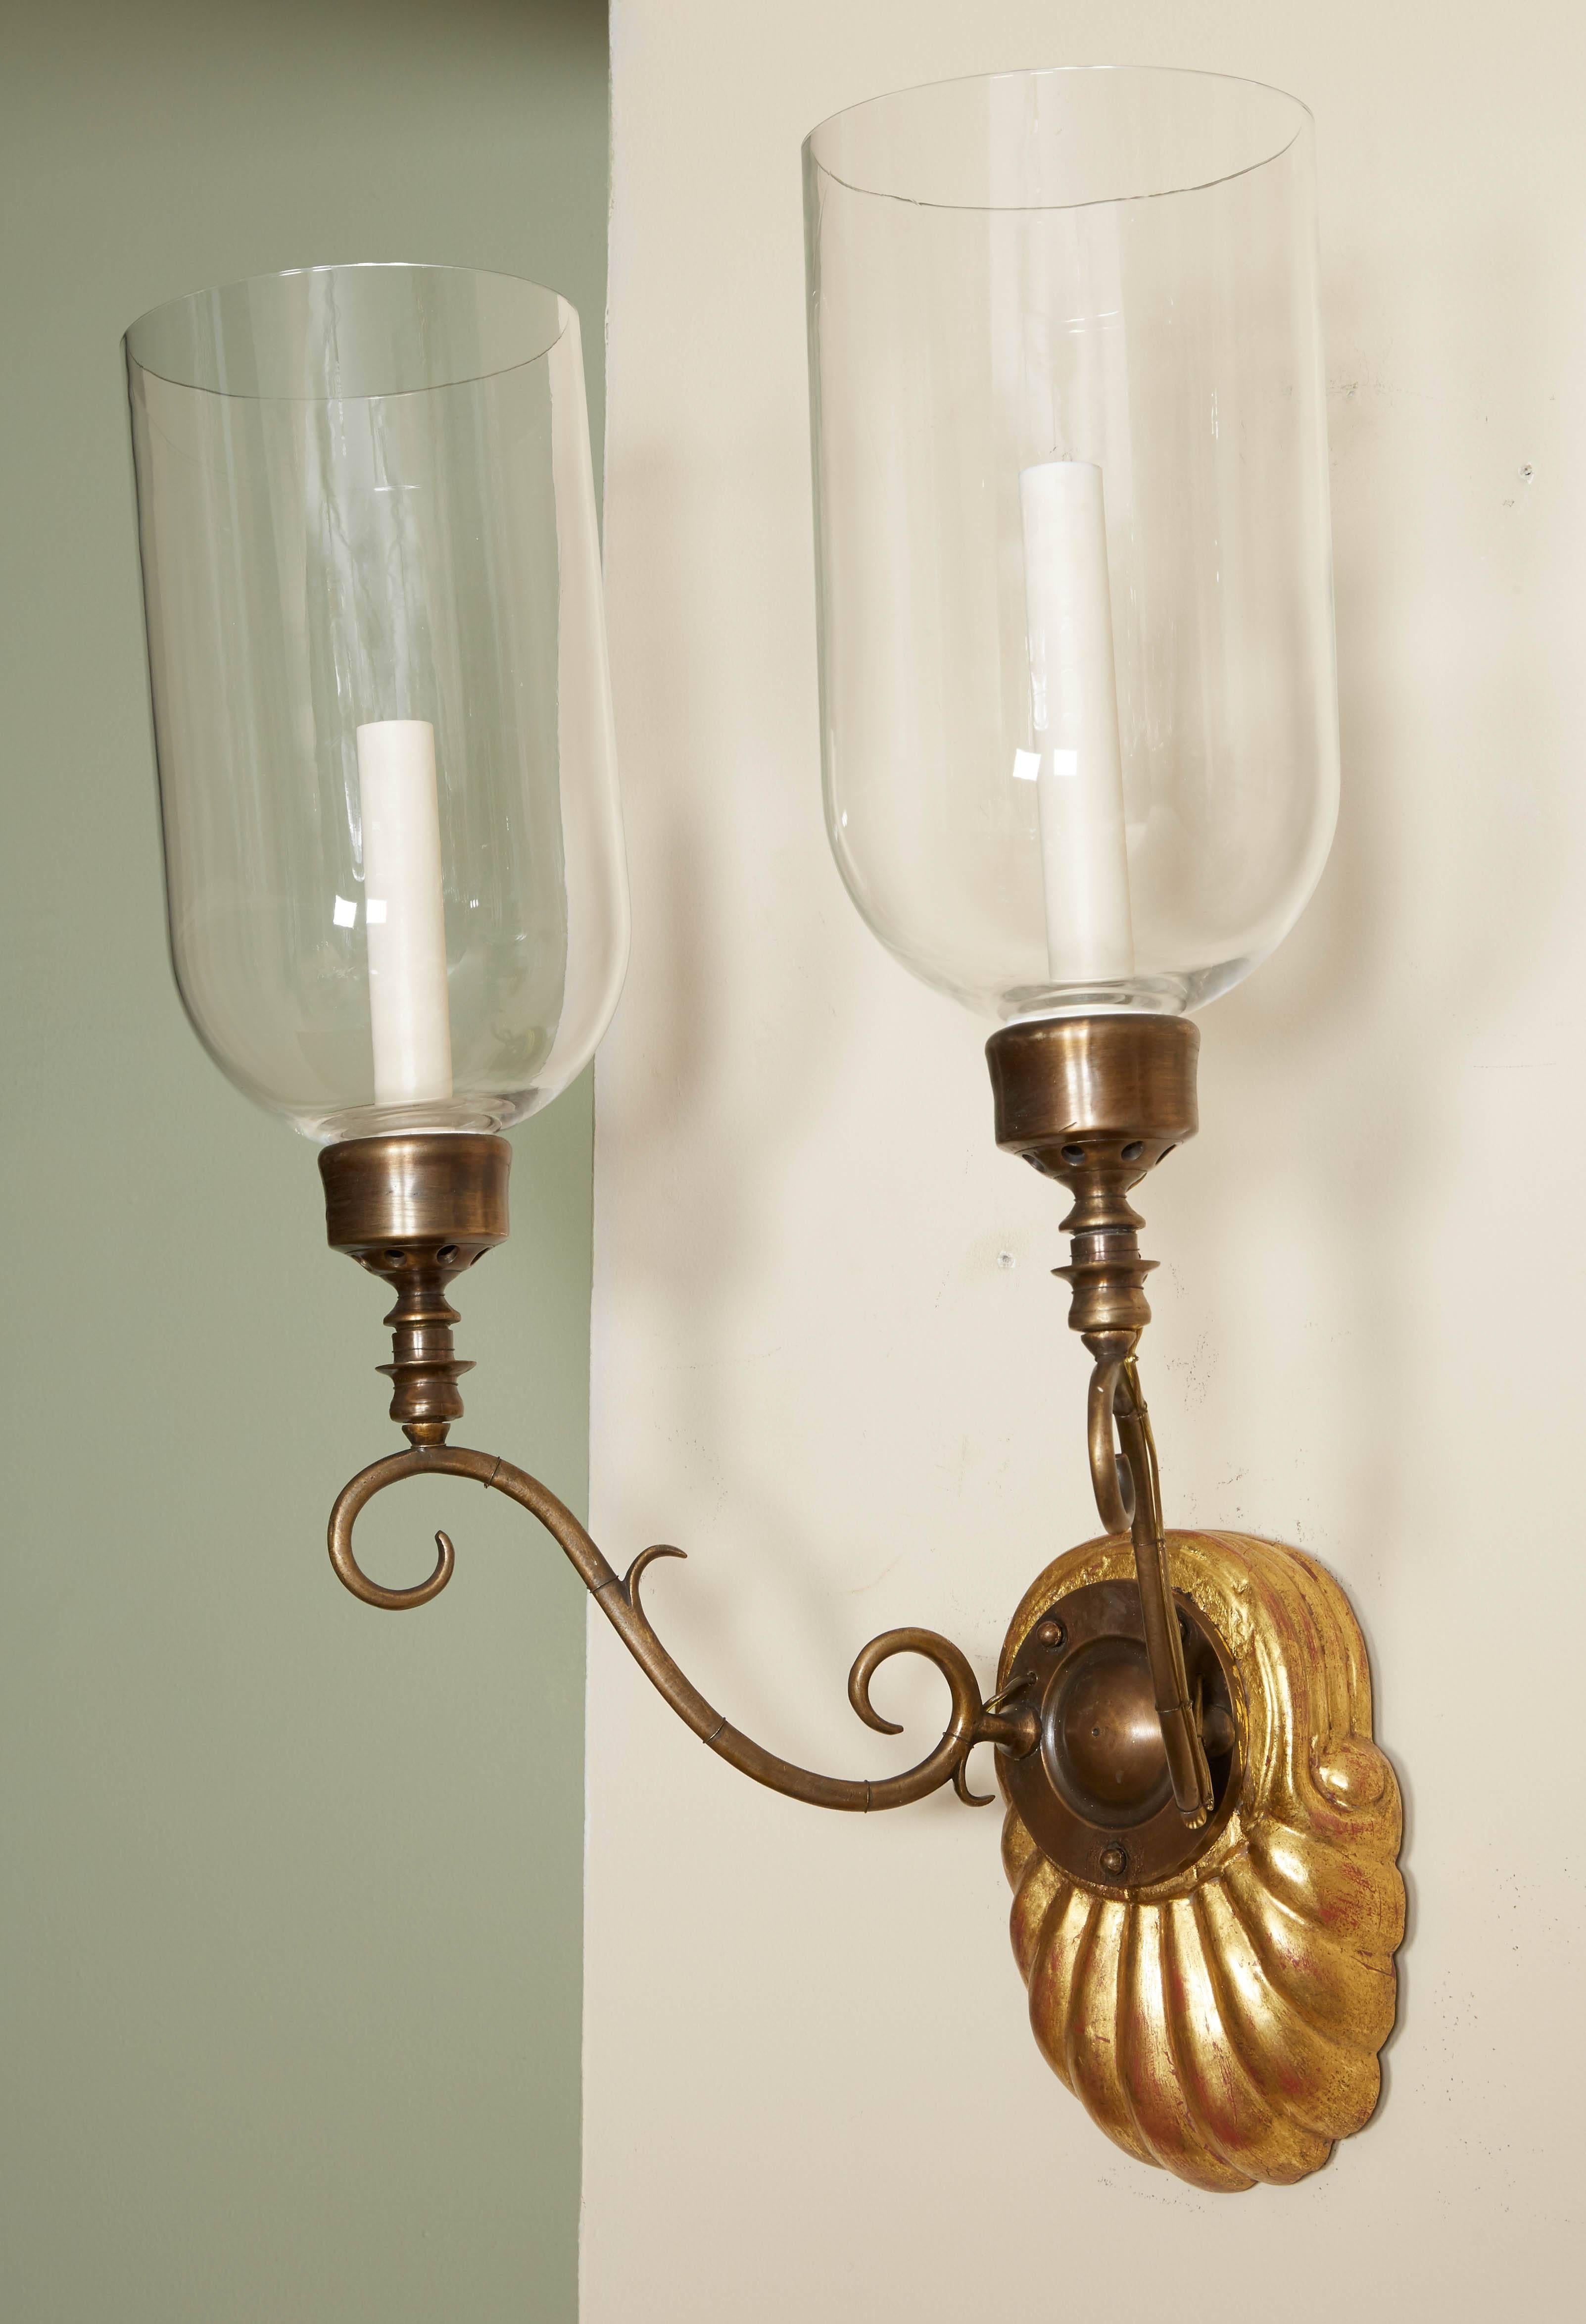 A pair of Anglo-Indian two-light sconces, gilded hardwood shell form backplate issuing bronze out-scrolled candle-arms supporting a single Edison socket with hurricane shade, circa 1890.

Dimensions; 
24